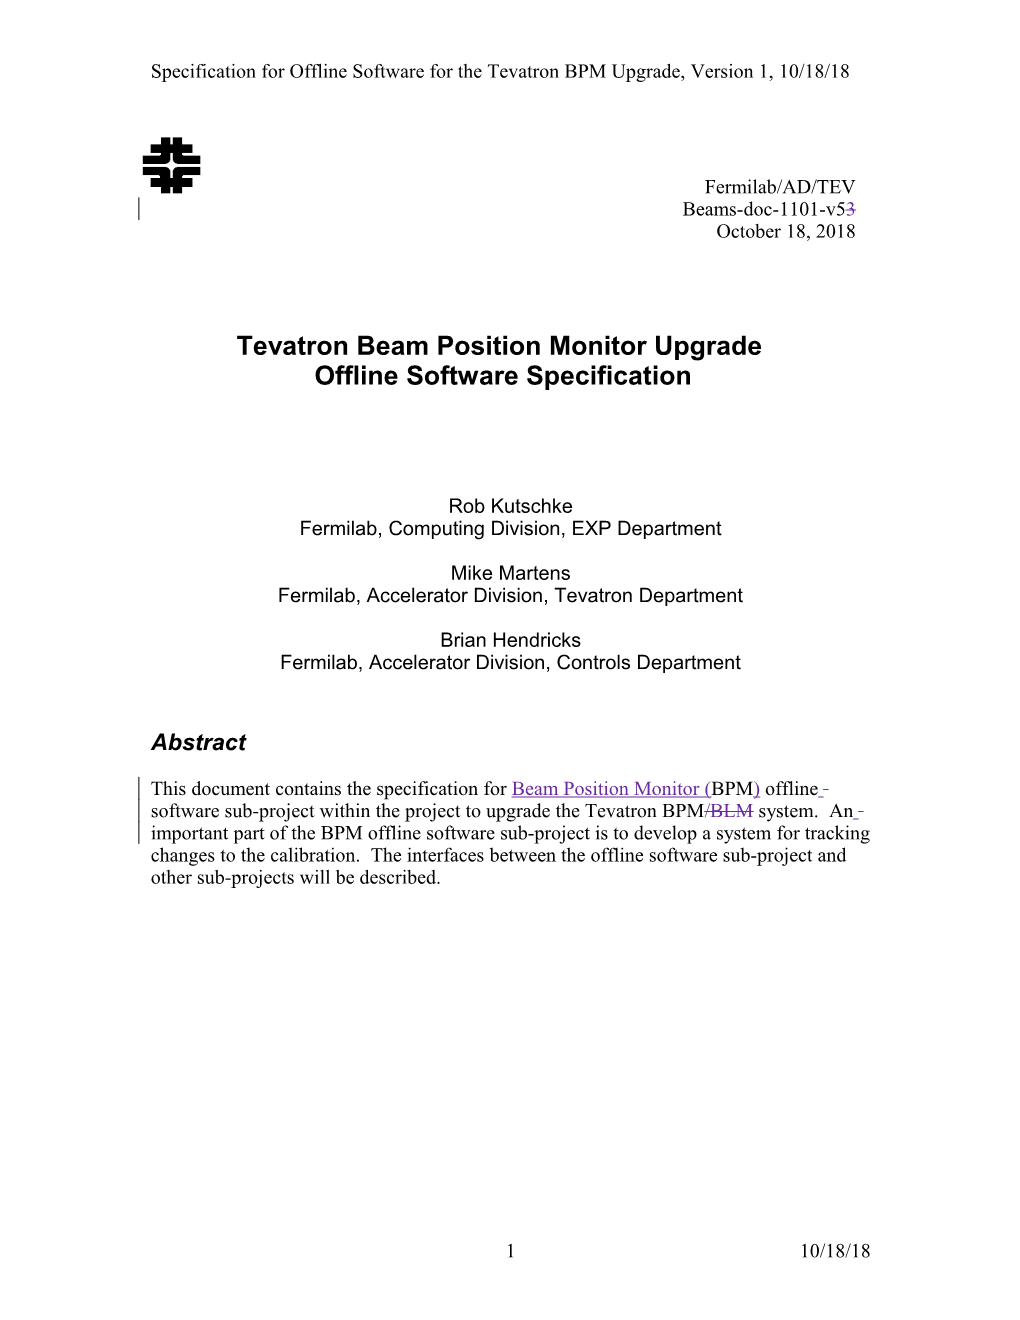 Offline Software Requirements for Tev BPM Upgrade